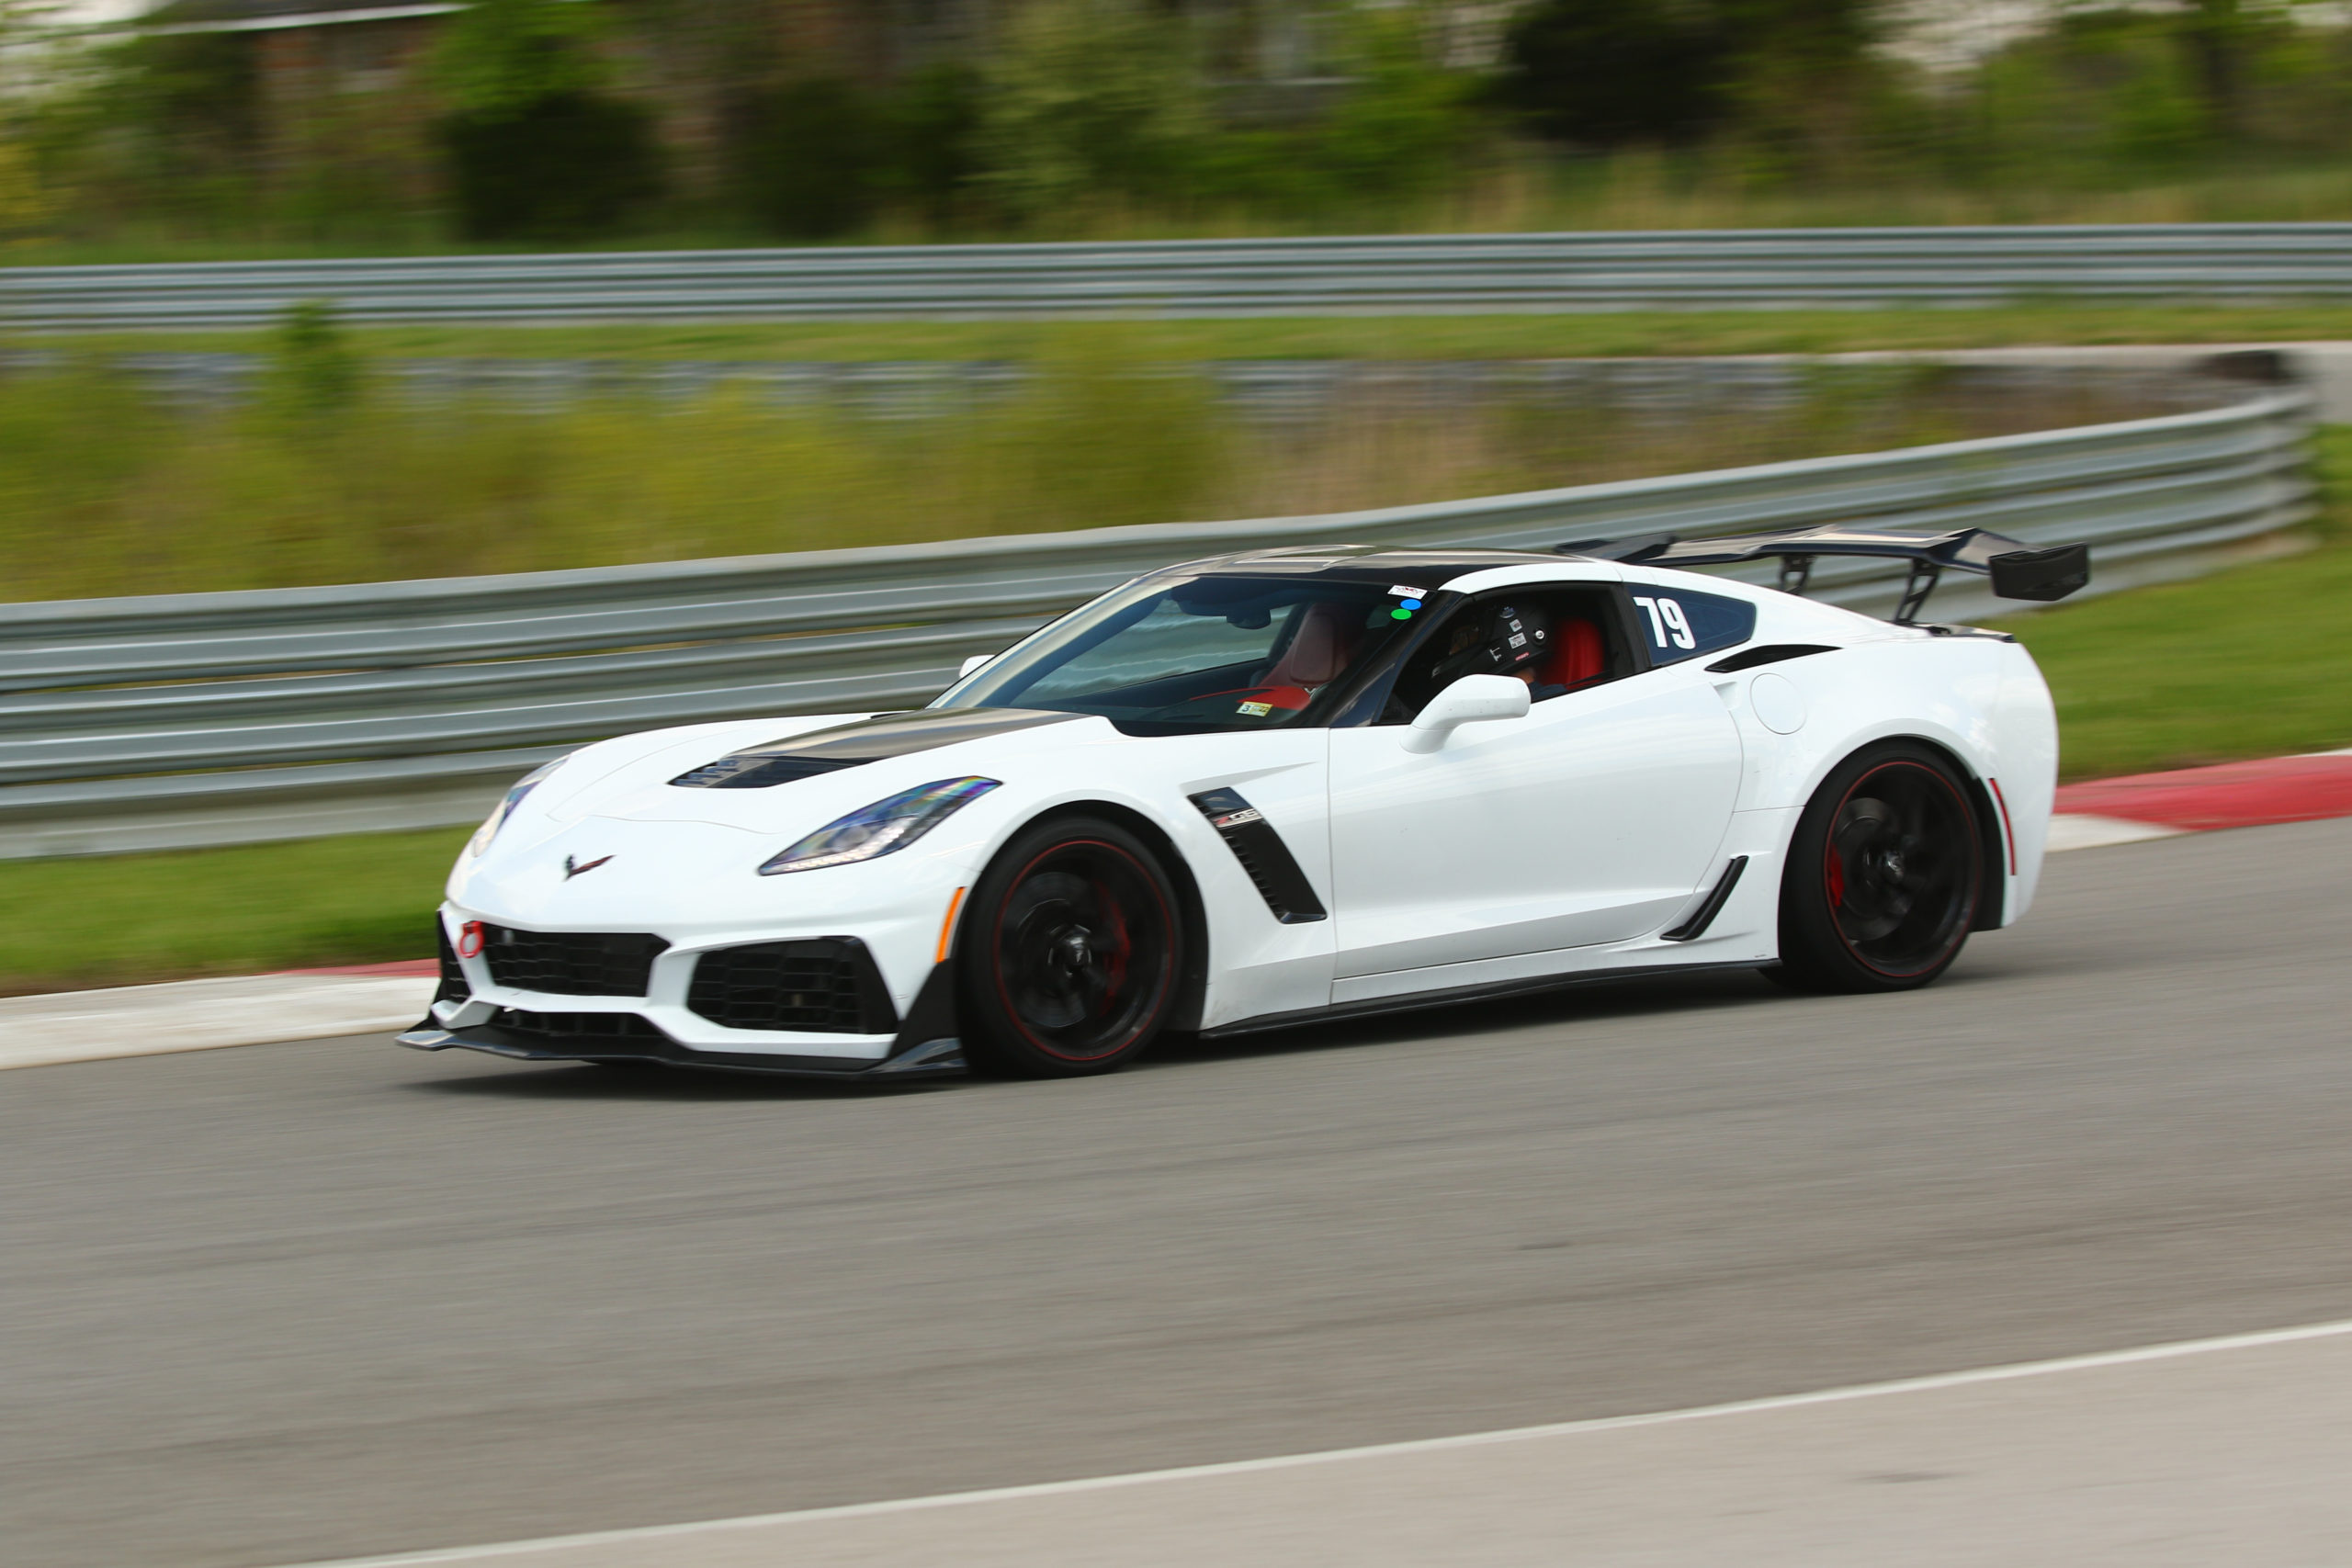 Motorsports: White Corvette, An American two-door luxury sports car, Racing track. 2560x1710 HD Background.